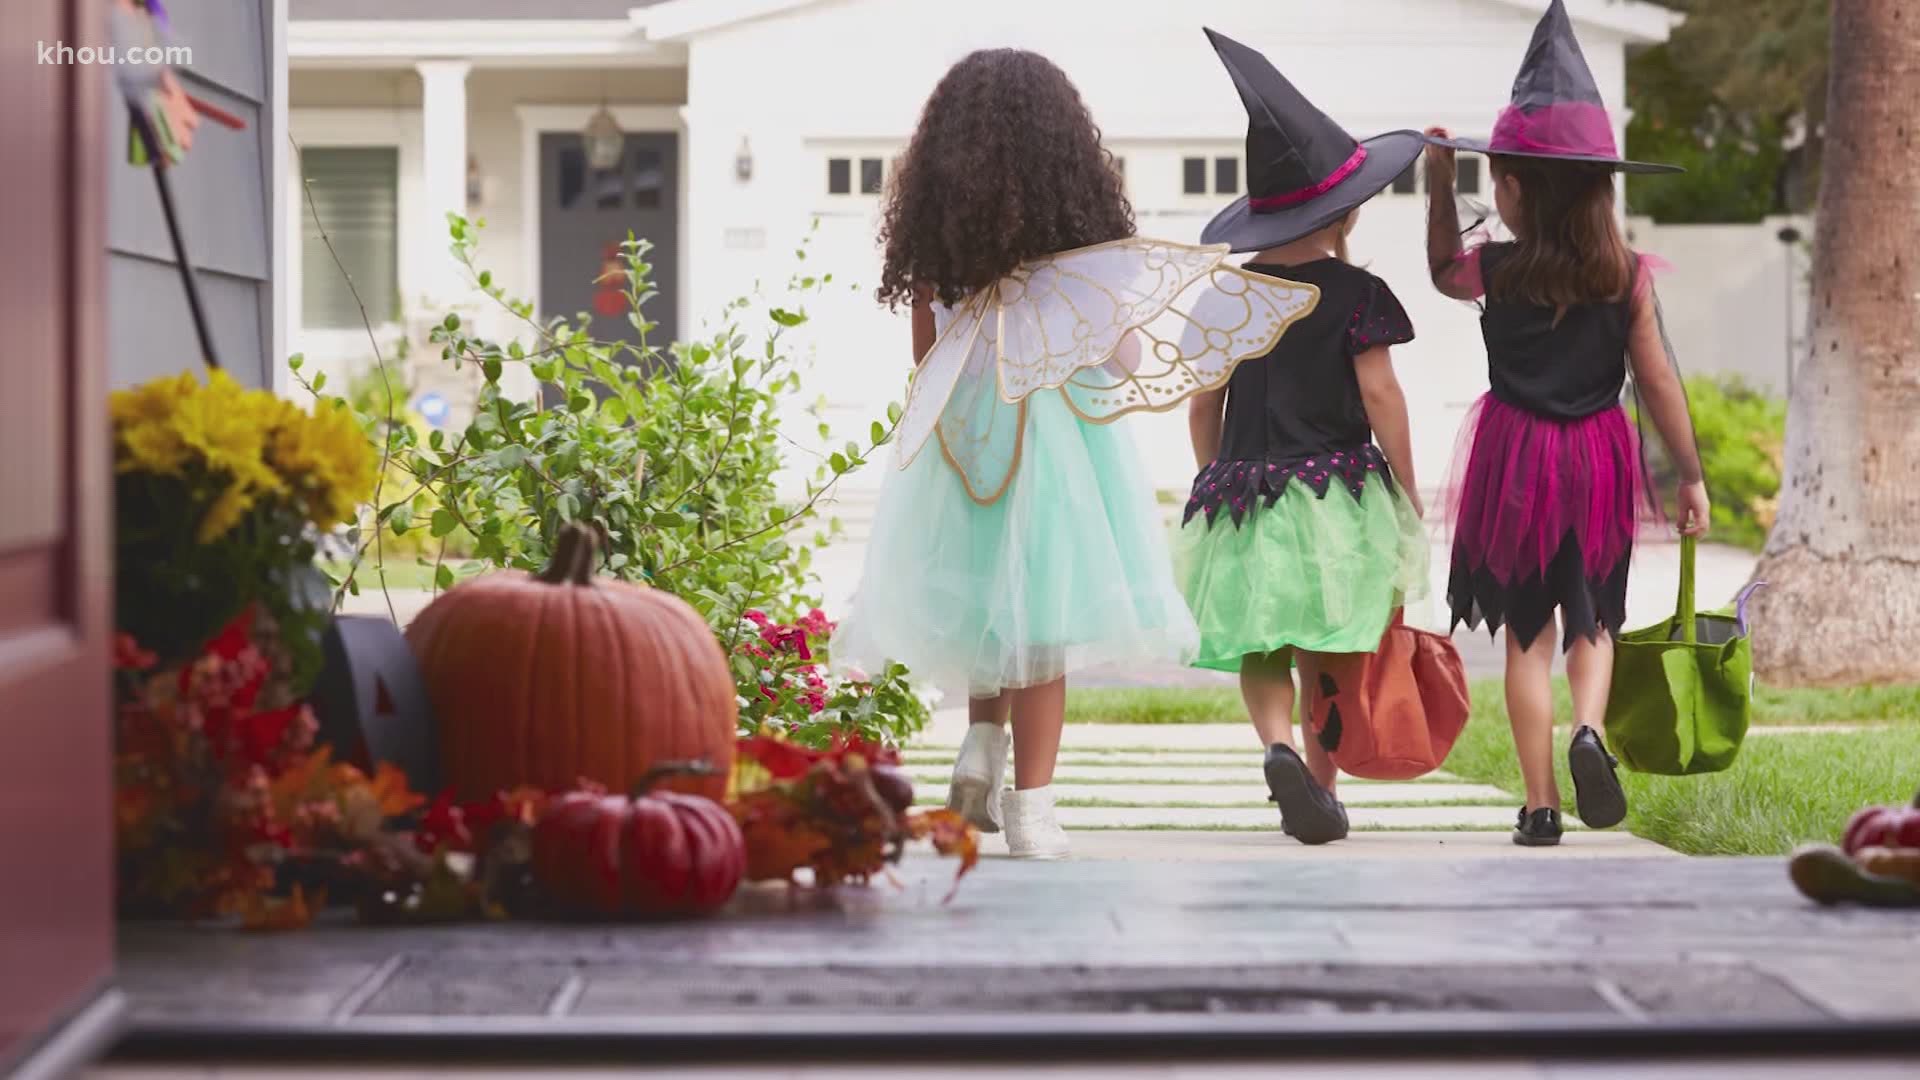 A Houston pediatrician weighs in how to celebrate Halloween safely.